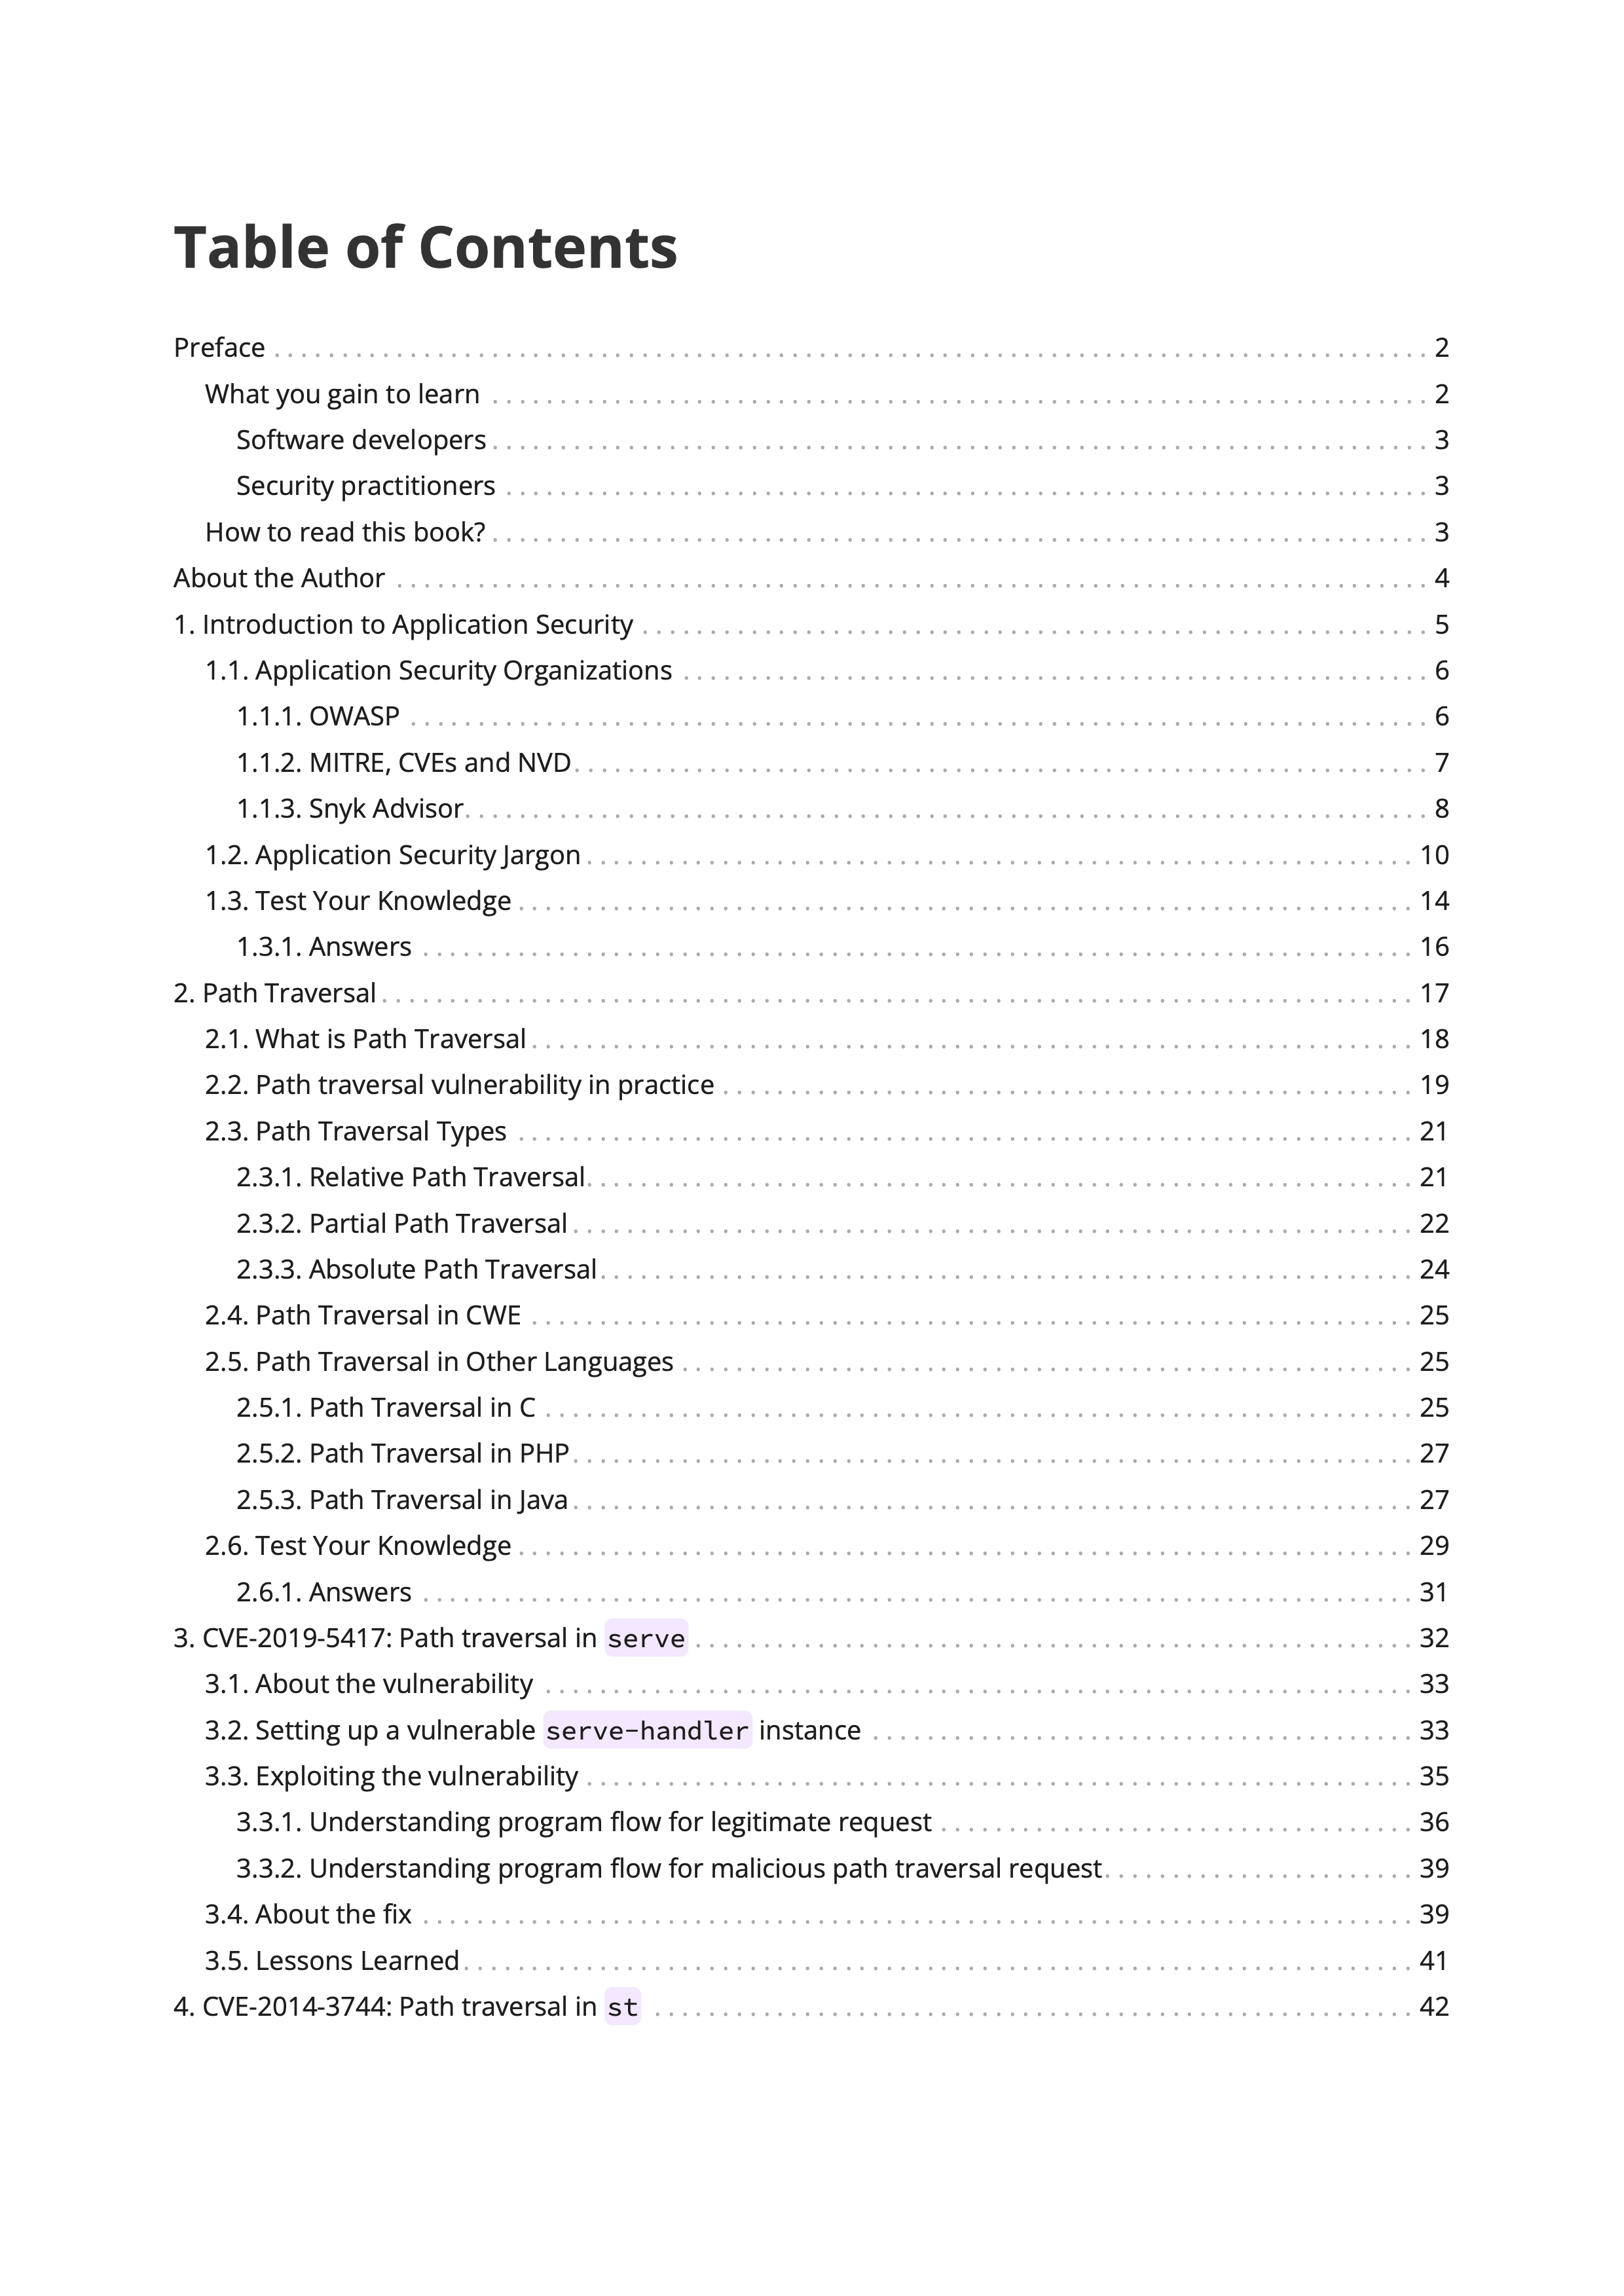 Path Traversal book table of contents